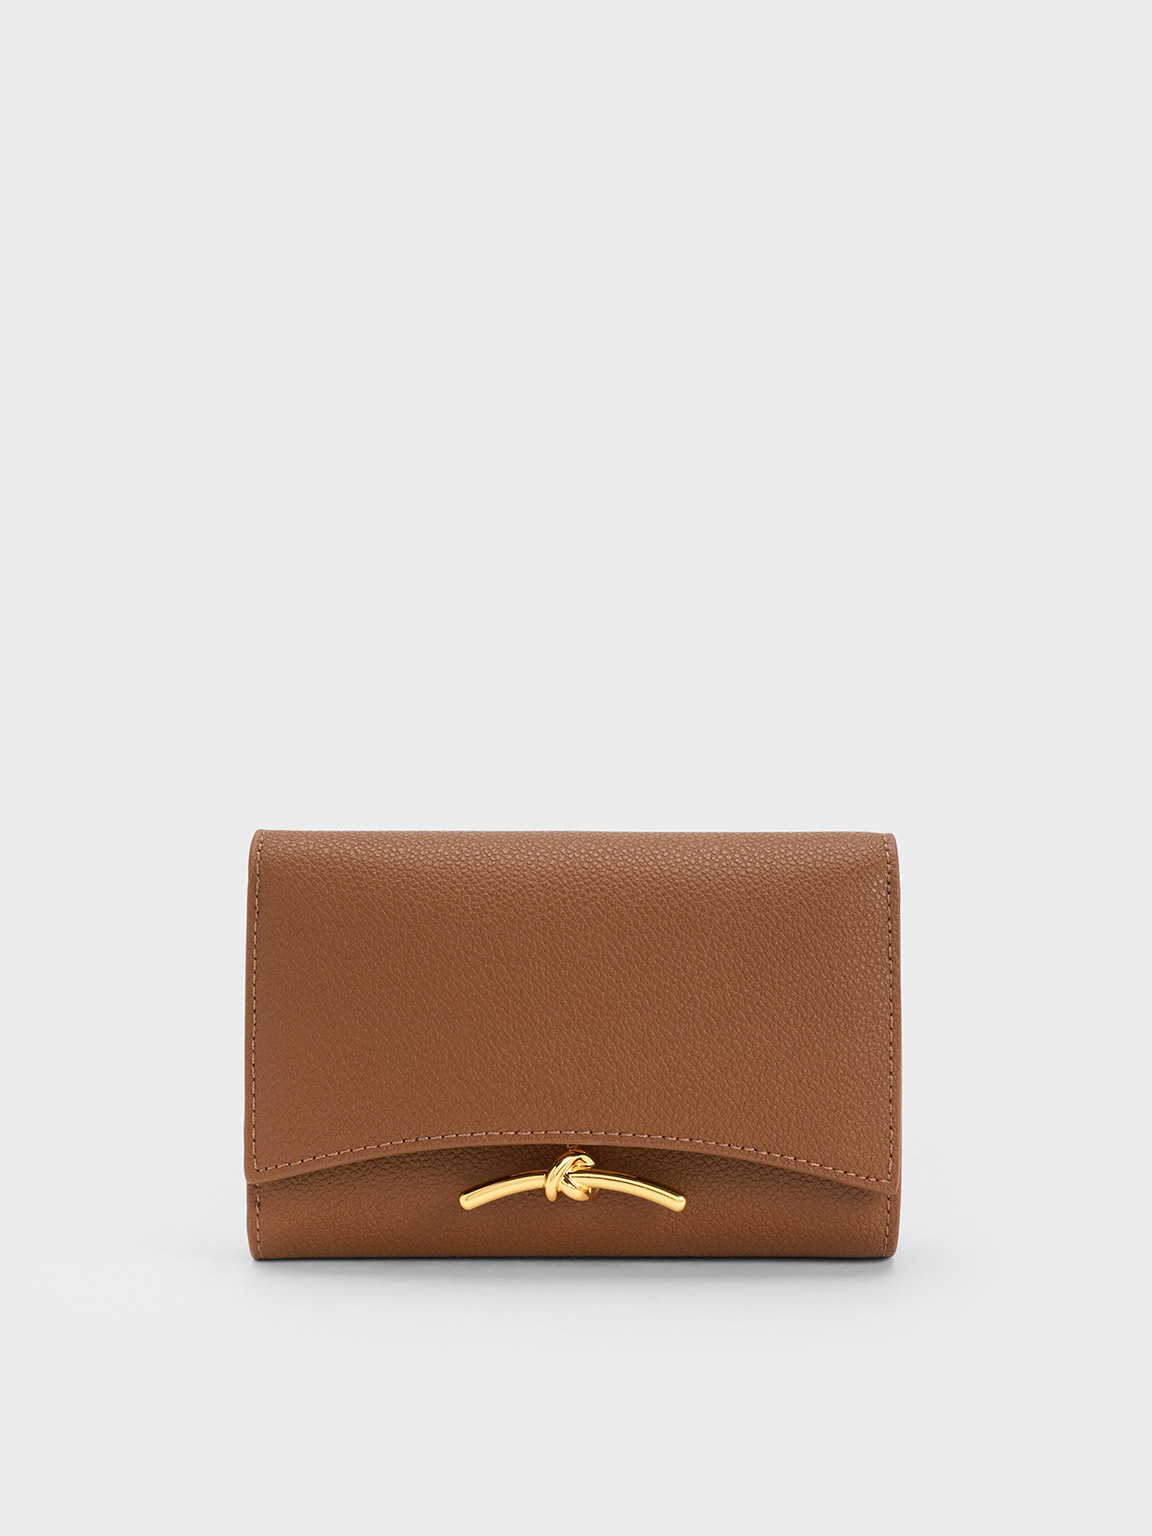 Charles & Keith Huxley Metallic Accent Front Flap Wallet In Chocolate